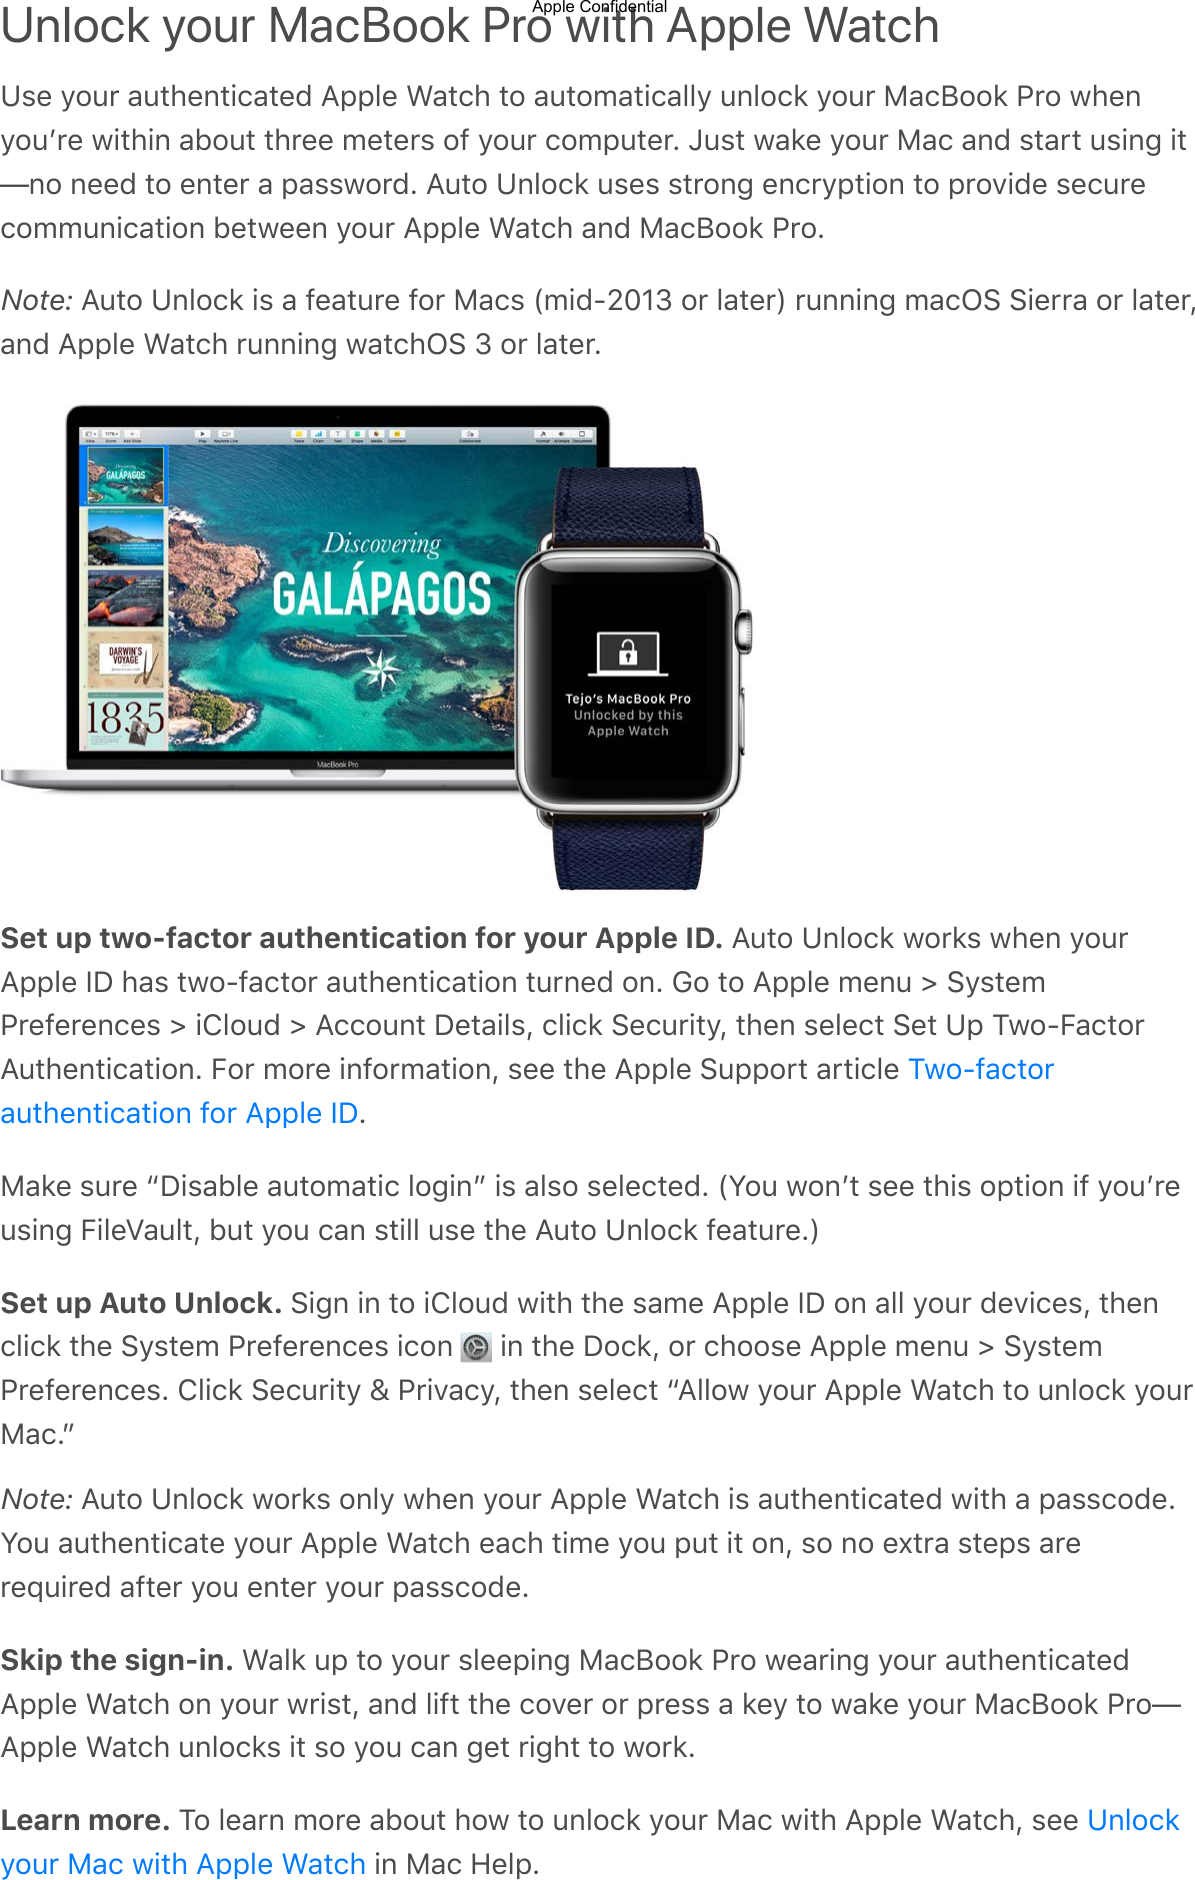 Unlock your MacBook Pro with Apple Watch:93$@&quot;0#$&amp;0-.31-,&apos;&amp;-32$&lt;==53$D&amp;-&apos;.$-&quot;$&amp;0-&quot;B&amp;-,&apos;&amp;55@$015&quot;&apos;)$@&quot;0#$%&amp;&apos;(&quot;&quot;)$*#&quot;$+.31@&quot;0L#3$+,-.,1$&amp;4&quot;0-$-.#33$B3-3#9$&quot;!$@&quot;0#$&apos;&quot;B=0-3#C$k09-$+&amp;)3$@&quot;0#$%&amp;&apos;$&amp;12$9-&amp;#-$09,17$,-a1&quot;$1332$-&quot;$31-3#$&amp;$=&amp;99+&quot;#2C$&lt;0-&quot;$:15&quot;&apos;)$0939$9-#&quot;17$31&apos;#@=-,&quot;1$-&quot;$=#&quot;;,23$93&apos;0#3&apos;&quot;BB01,&apos;&amp;-,&quot;1$43-+331$@&quot;0#$&lt;==53$D&amp;-&apos;.$&amp;12$%&amp;&apos;(&quot;&quot;)$*#&quot;CNote: &lt;0-&quot;$:15&quot;&apos;)$,9$&amp;$!3&amp;-0#3$!&quot;#$%&amp;&apos;9$FB,2VbY]6$&quot;#$5&amp;-3#G$#011,17$B&amp;&apos;O?$?,3##&amp;$&quot;#$5&amp;-3#A&amp;12$&lt;==53$D&amp;-&apos;.$#011,17$+&amp;-&apos;.O?$6$&quot;#$5&amp;-3#CSet up two-factor authentication for your Apple ID. &lt;0-&quot;$:15&quot;&apos;)$+&quot;#)9$+.31$@&quot;0#&lt;==53$JK$.&amp;9$-+&quot;V!&amp;&apos;-&quot;#$&amp;0-.31-,&apos;&amp;-,&quot;1$-0#132$&quot;1C$8&quot;$-&quot;$&lt;==53$B310$c$?@9-3B*#3!3#31&apos;39$c$,M5&quot;02$c$&lt;&apos;&apos;&quot;01-$K3-&amp;,59A$&apos;5,&apos;)$?3&apos;0#,-@A$-.31$9353&apos;-$?3-$:=$/+&quot;V&gt;&amp;&apos;-&quot;#&lt;0-.31-,&apos;&amp;-,&quot;1C$&gt;&quot;#$B&quot;#3$,1!&quot;#B&amp;-,&quot;1A$933$-.3$&lt;==53$?0==&quot;#-$&amp;#-,&apos;53$C%&amp;)3$90#3$eK,9&amp;453$&amp;0-&quot;B&amp;-,&apos;$5&quot;7,1f$,9$&amp;59&quot;$9353&apos;-32C$FZ&quot;0$+&quot;1L-$933$-.,9$&quot;=-,&quot;1$,!$@&quot;0L#309,17$&gt;,53h&amp;05-A$40-$@&quot;0$&apos;&amp;1$9-,55$093$-.3$&lt;0-&quot;$:15&quot;&apos;)$!3&amp;-0#3CGSet up Auto Unlock. ?,71$,1$-&quot;$,M5&quot;02$+,-.$-.3$9&amp;B3$&lt;==53$JK$&quot;1$&amp;55$@&quot;0#$23;,&apos;39A$-.31&apos;5,&apos;)$-.3$?@9-3B$*#3!3#31&apos;39$,&apos;&quot;1$ $,1$-.3$K&quot;&apos;)A$&quot;#$&apos;.&quot;&quot;93$&lt;==53$B310$c$?@9-3B*#3!3#31&apos;39C$M5,&apos;)$?3&apos;0#,-@$g$*#,;&amp;&apos;@A$-.31$9353&apos;-$e&lt;55&quot;+$@&quot;0#$&lt;==53$D&amp;-&apos;.$-&quot;$015&quot;&apos;)$@&quot;0#%&amp;&apos;CfNote: &lt;0-&quot;$:15&quot;&apos;)$+&quot;#)9$&quot;15@$+.31$@&quot;0#$&lt;==53$D&amp;-&apos;.$,9$&amp;0-.31-,&apos;&amp;-32$+,-.$&amp;$=&amp;99&apos;&quot;23CZ&quot;0$&amp;0-.31-,&apos;&amp;-3$@&quot;0#$&lt;==53$D&amp;-&apos;.$3&amp;&apos;.$-,B3$@&quot;0$=0-$,-$&quot;1A$9&quot;$1&quot;$3I-#&amp;$9-3=9$&amp;#3#3E0,#32$&amp;!-3#$@&quot;0$31-3#$@&quot;0#$=&amp;99&apos;&quot;23CSkip the sign-in. D&amp;5)$0=$-&quot;$@&quot;0#$9533=,17$%&amp;&apos;(&quot;&quot;)$*#&quot;$+3&amp;#,17$@&quot;0#$&amp;0-.31-,&apos;&amp;-32&lt;==53$D&amp;-&apos;.$&quot;1$@&quot;0#$+#,9-A$&amp;12$5,!-$-.3$&apos;&quot;;3#$&quot;#$=#399$&amp;$)3@$-&quot;$+&amp;)3$@&quot;0#$%&amp;&apos;(&quot;&quot;)$*#&quot;a&lt;==53$D&amp;-&apos;.$015&quot;&apos;)9$,-$9&quot;$@&quot;0$&apos;&amp;1$73-$#,7.-$-&quot;$+&quot;#)CLearn more. /&quot;$53&amp;#1$B&quot;#3$&amp;4&quot;0-$.&quot;+$-&quot;$015&quot;&apos;)$@&quot;0#$%&amp;&apos;$+,-.$&lt;==53$D&amp;-&apos;.A$933$$,1$%&amp;&apos;$P35=C/+&quot;V!&amp;&apos;-&quot;#&amp;0-.31-,&apos;&amp;-,&quot;1$!&quot;#$&lt;==53$JK:15&quot;&apos;)@&quot;0#$%&amp;&apos;$+,-.$&lt;==53$D&amp;-&apos;.Apple Confidential